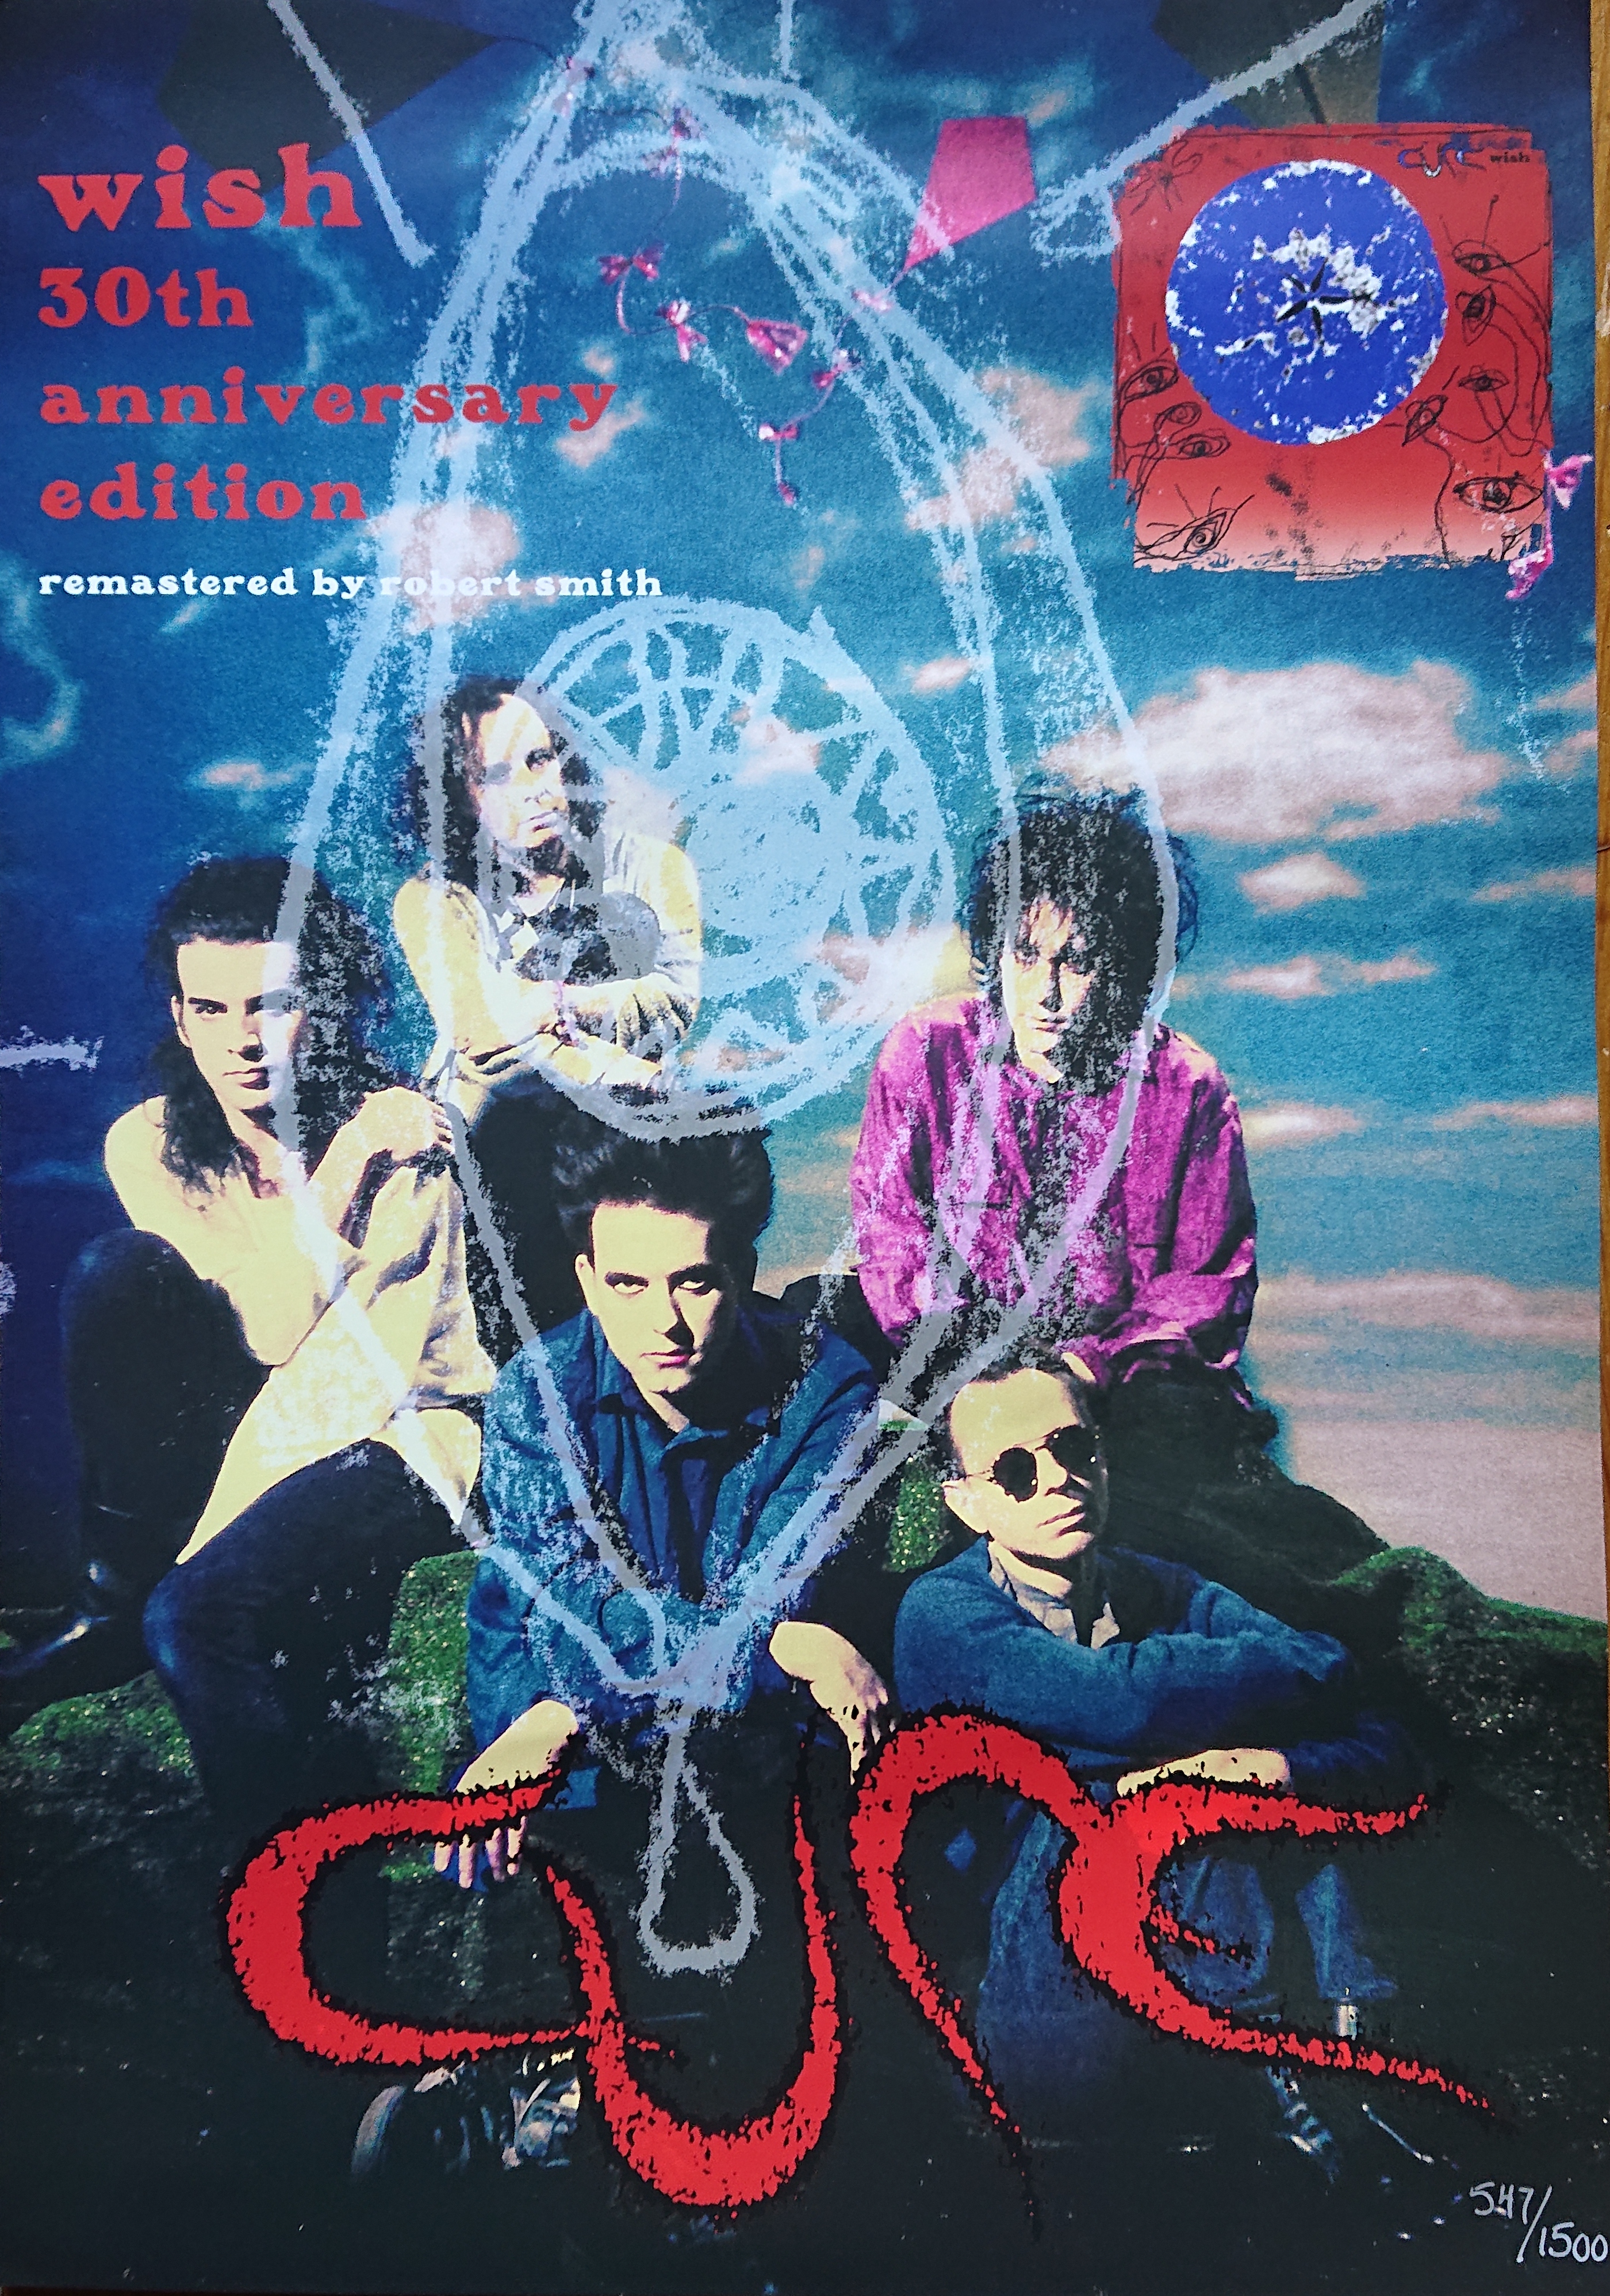 Picture of Wish 30th anniversary poster by artist The Cure 